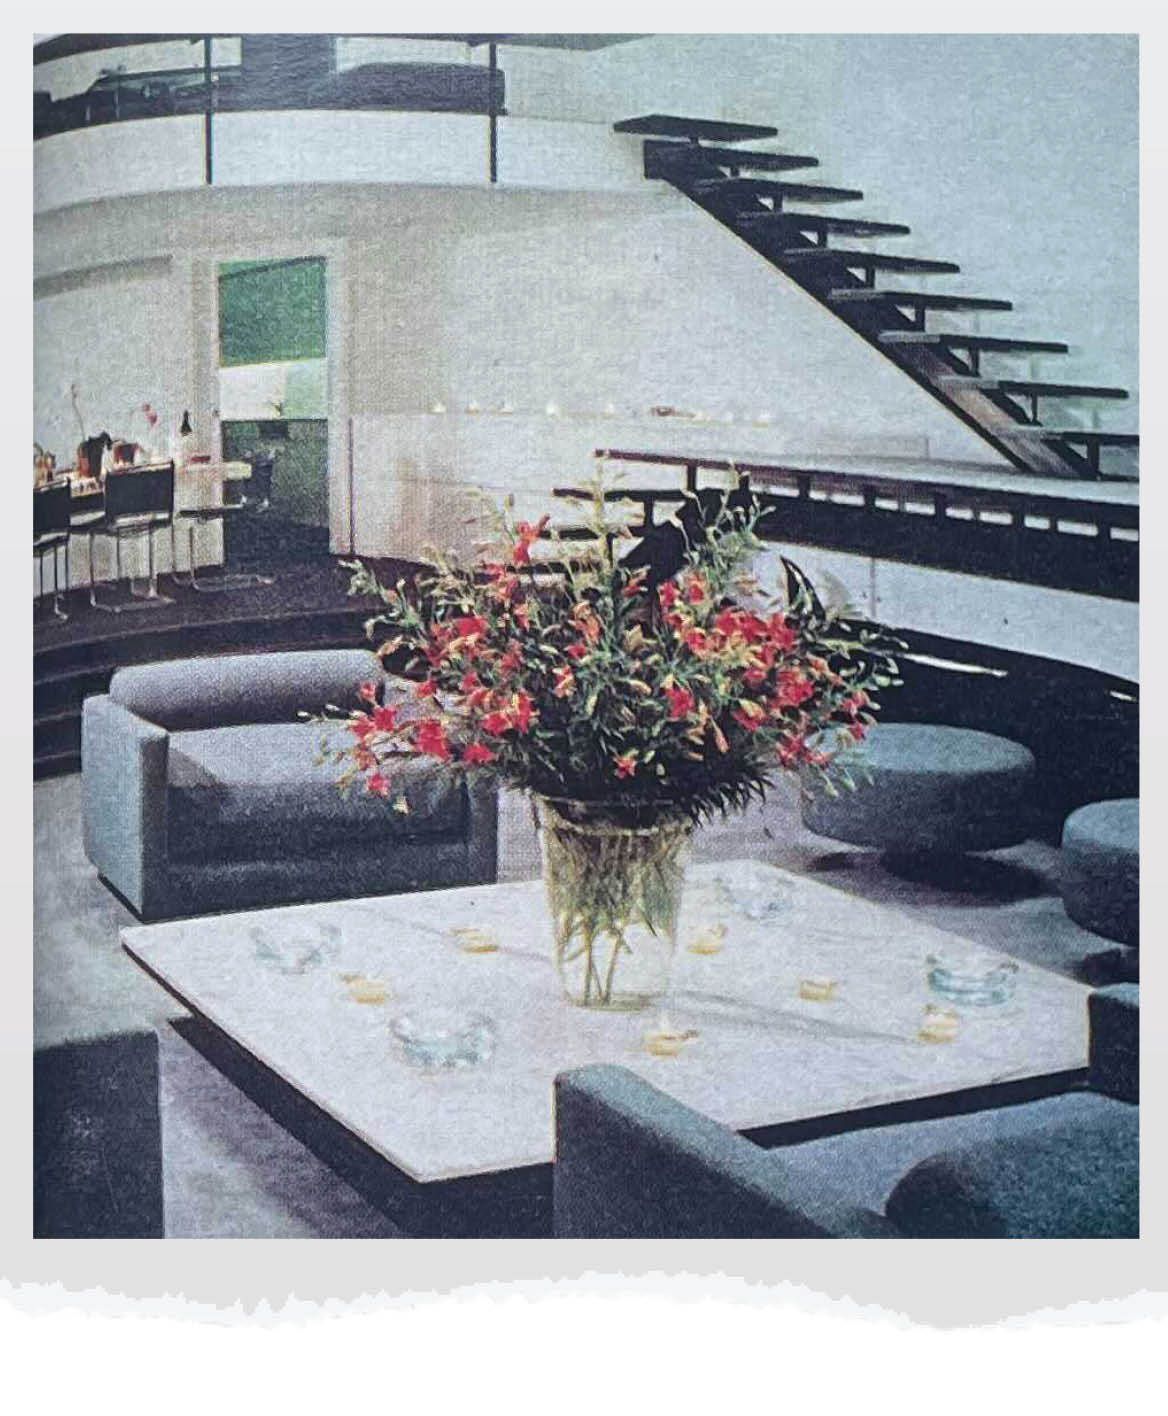 fashion designer halstons manhattan townhouse designed by paul rudolph as seen in house beautiful october 1977